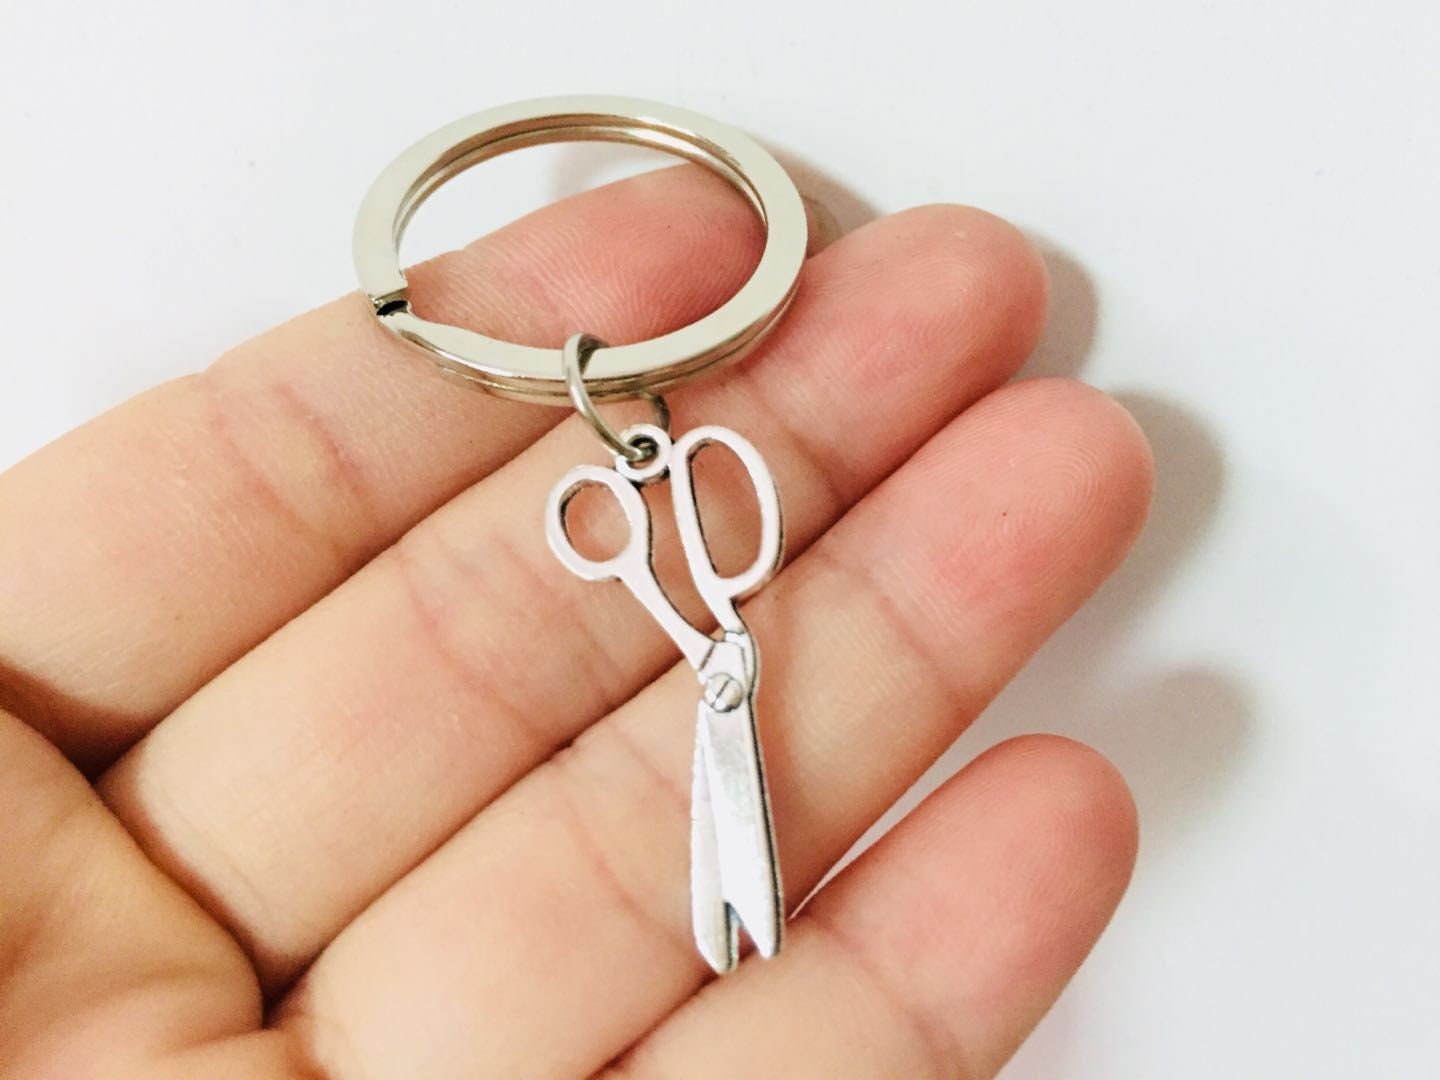 Scissors Key Ring for a Haircutting Pro